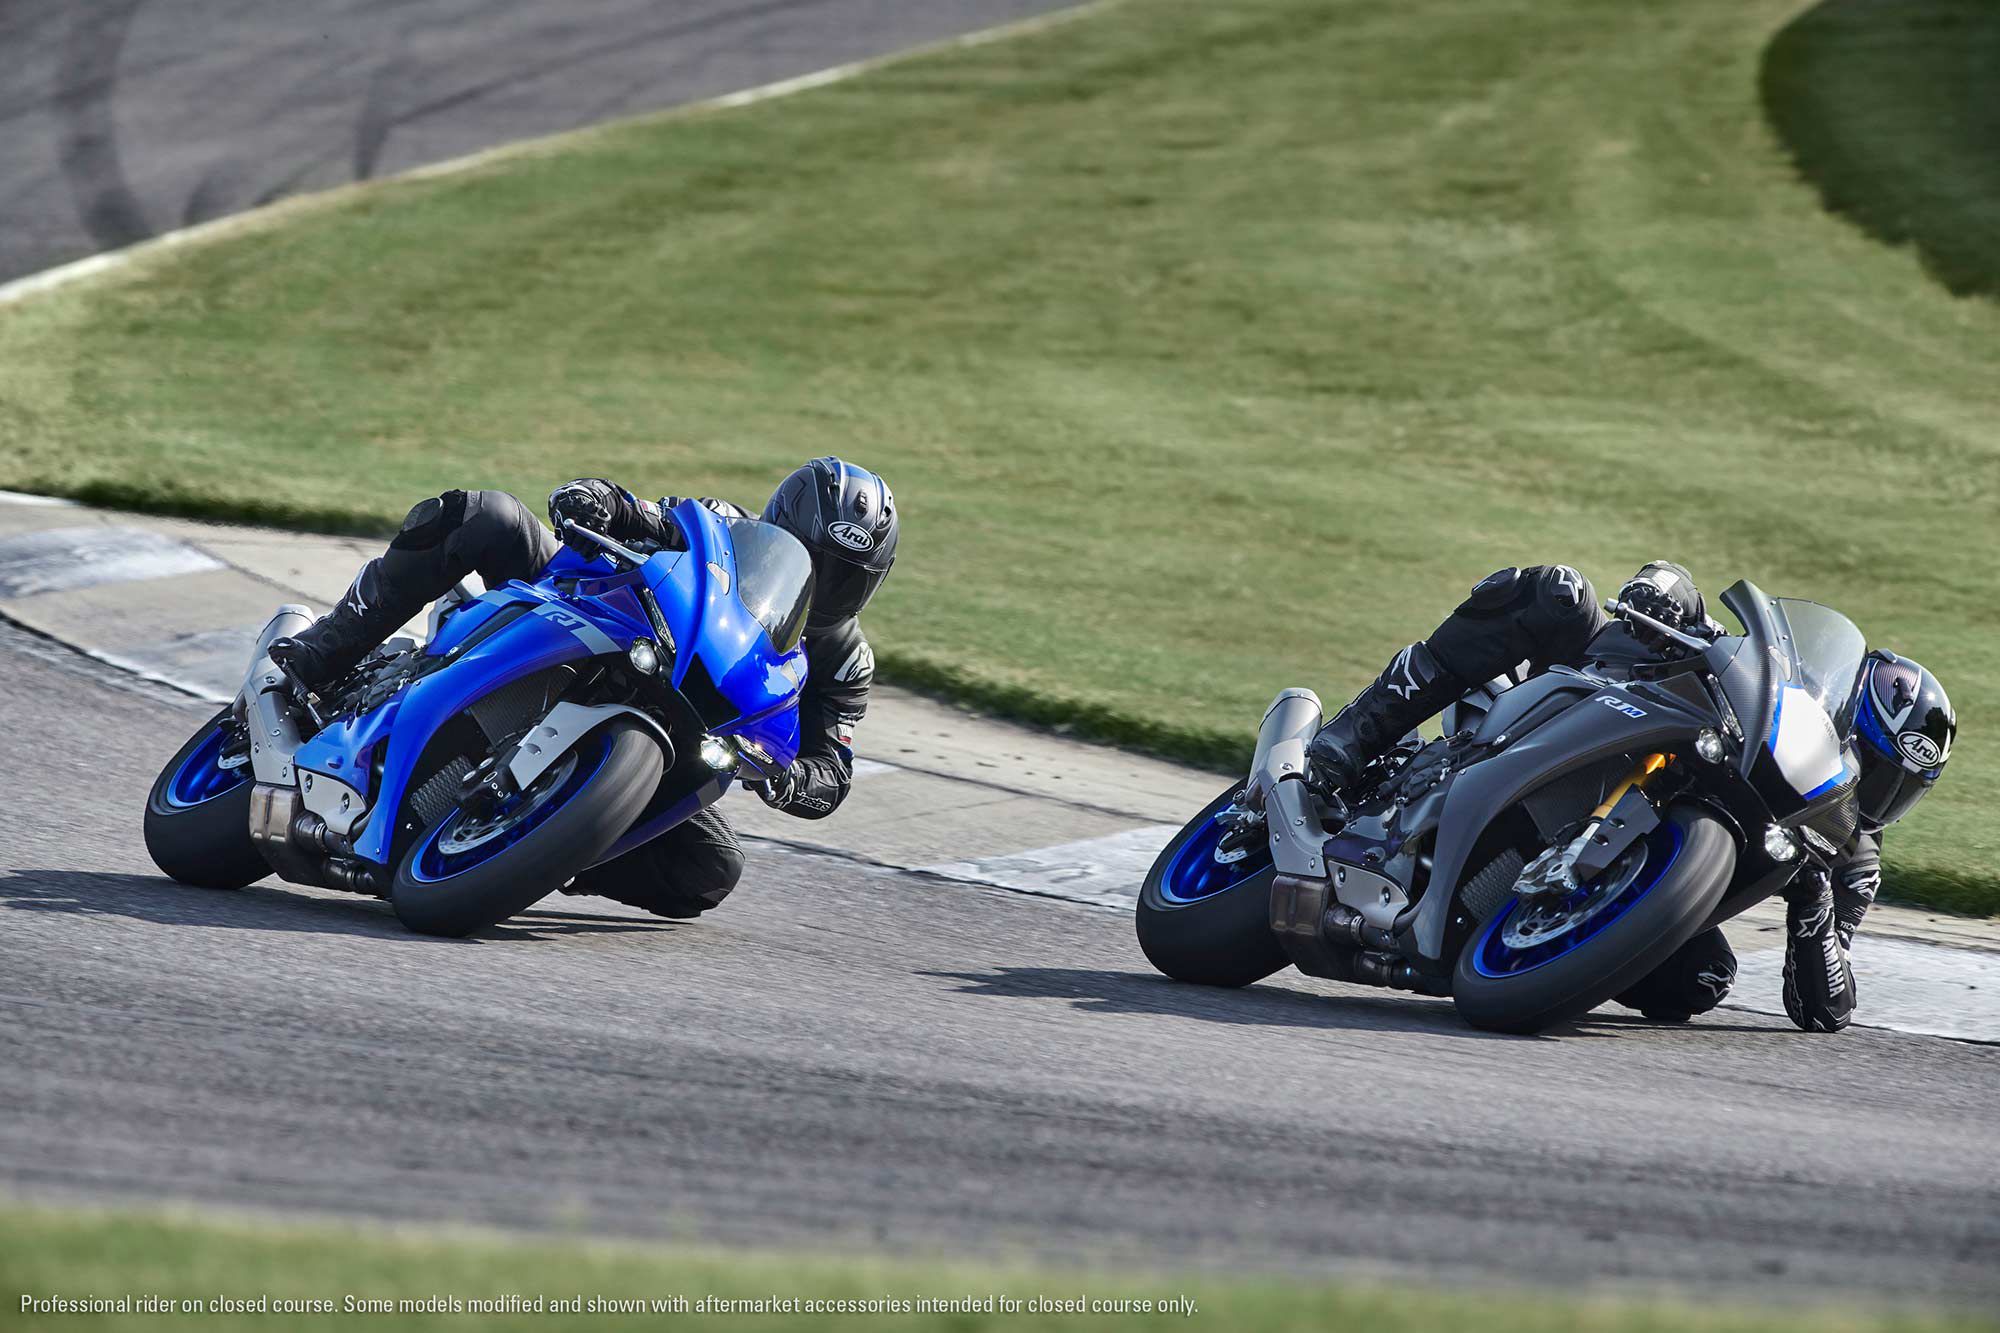 2021 Yamaha YZF-R1 and YZF-R1M.